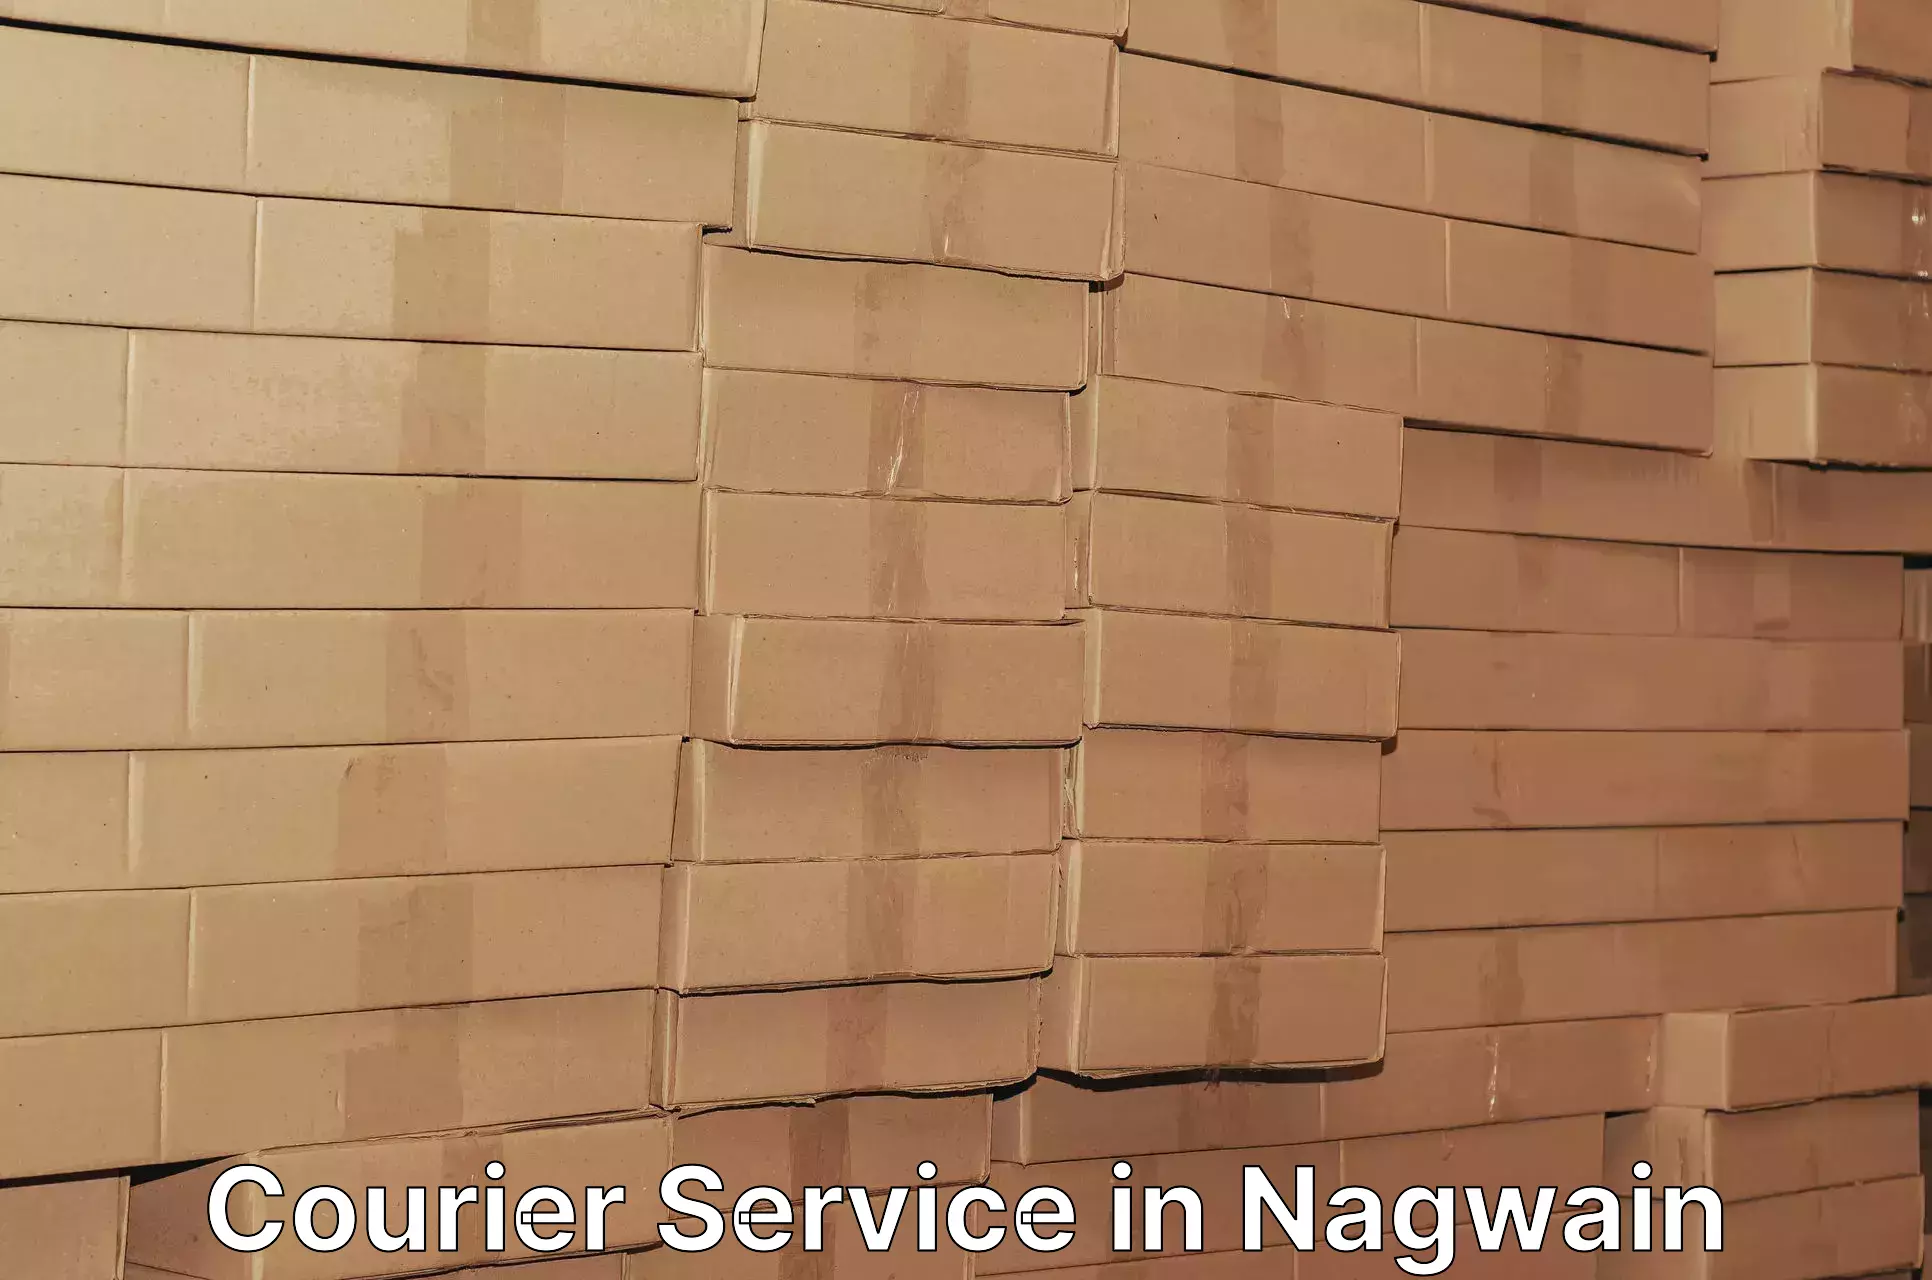 Parcel service for businesses in Nagwain